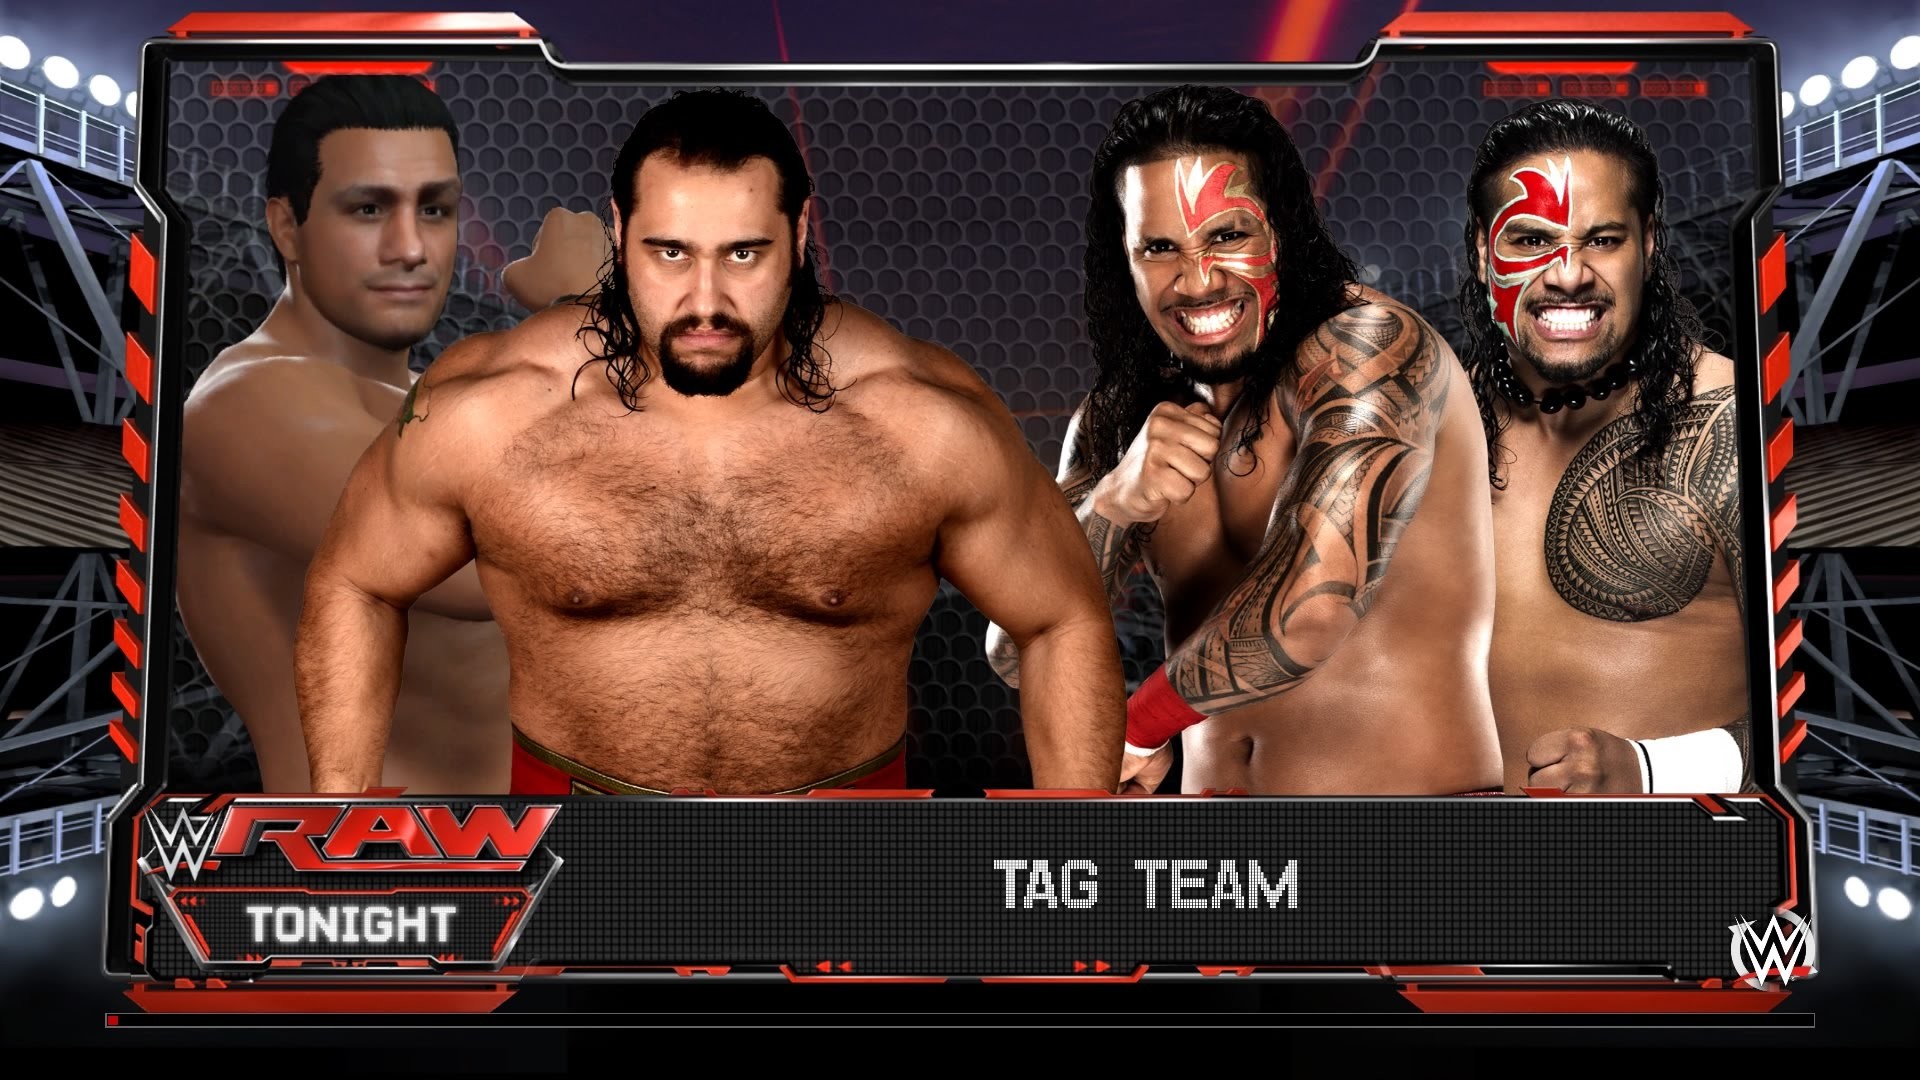 1920x1080 WWE Raw 1/4/16 The Usos vs The League of Nations 2K16 Gameplay results